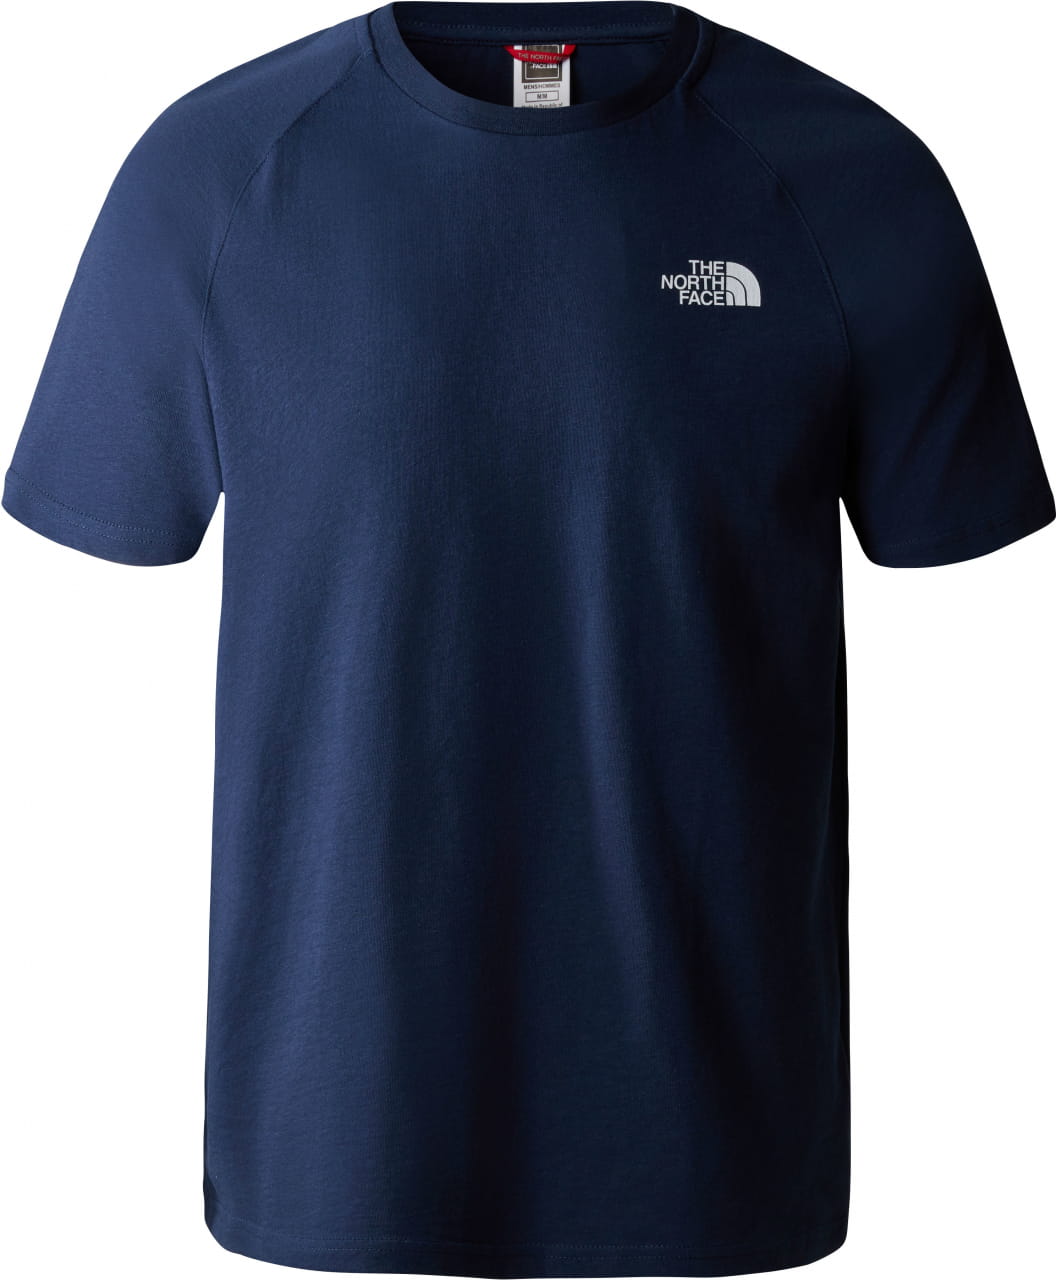 Camiseta deportiva de hombre The North Face M S/S North Faces Tee